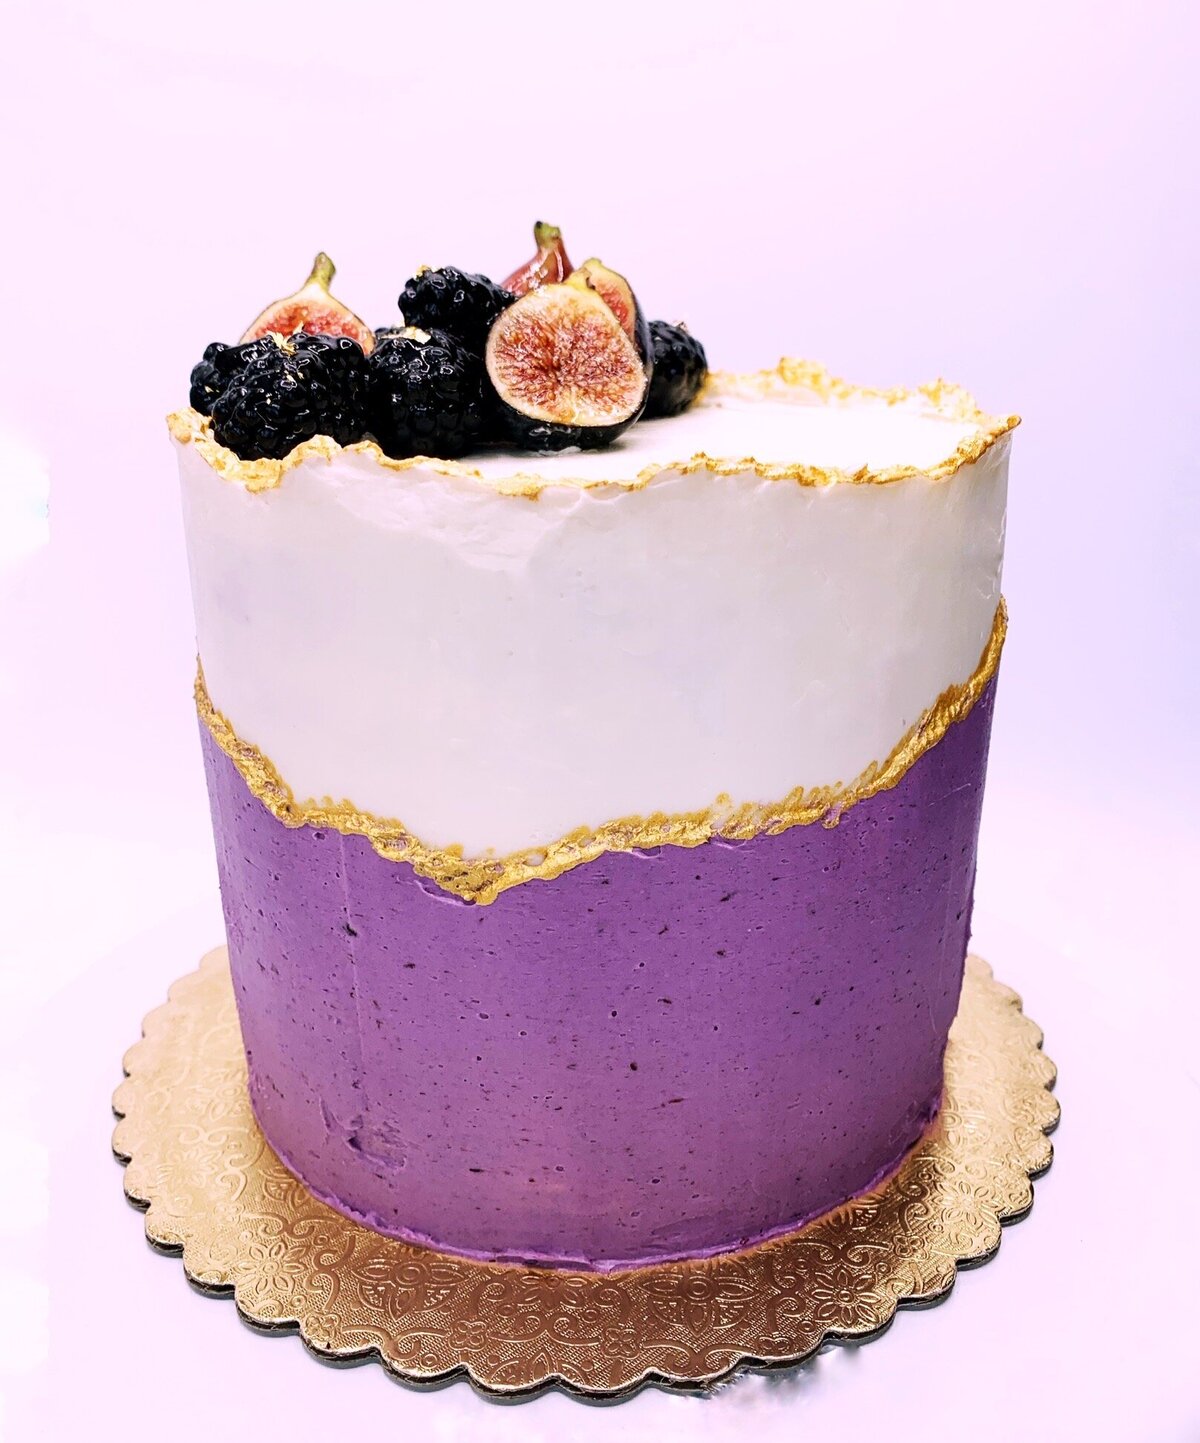 Vanilla  and blackberry buttercream cake with gold accents in Kintsugi style design. Topped with fresh figs and blackberries.